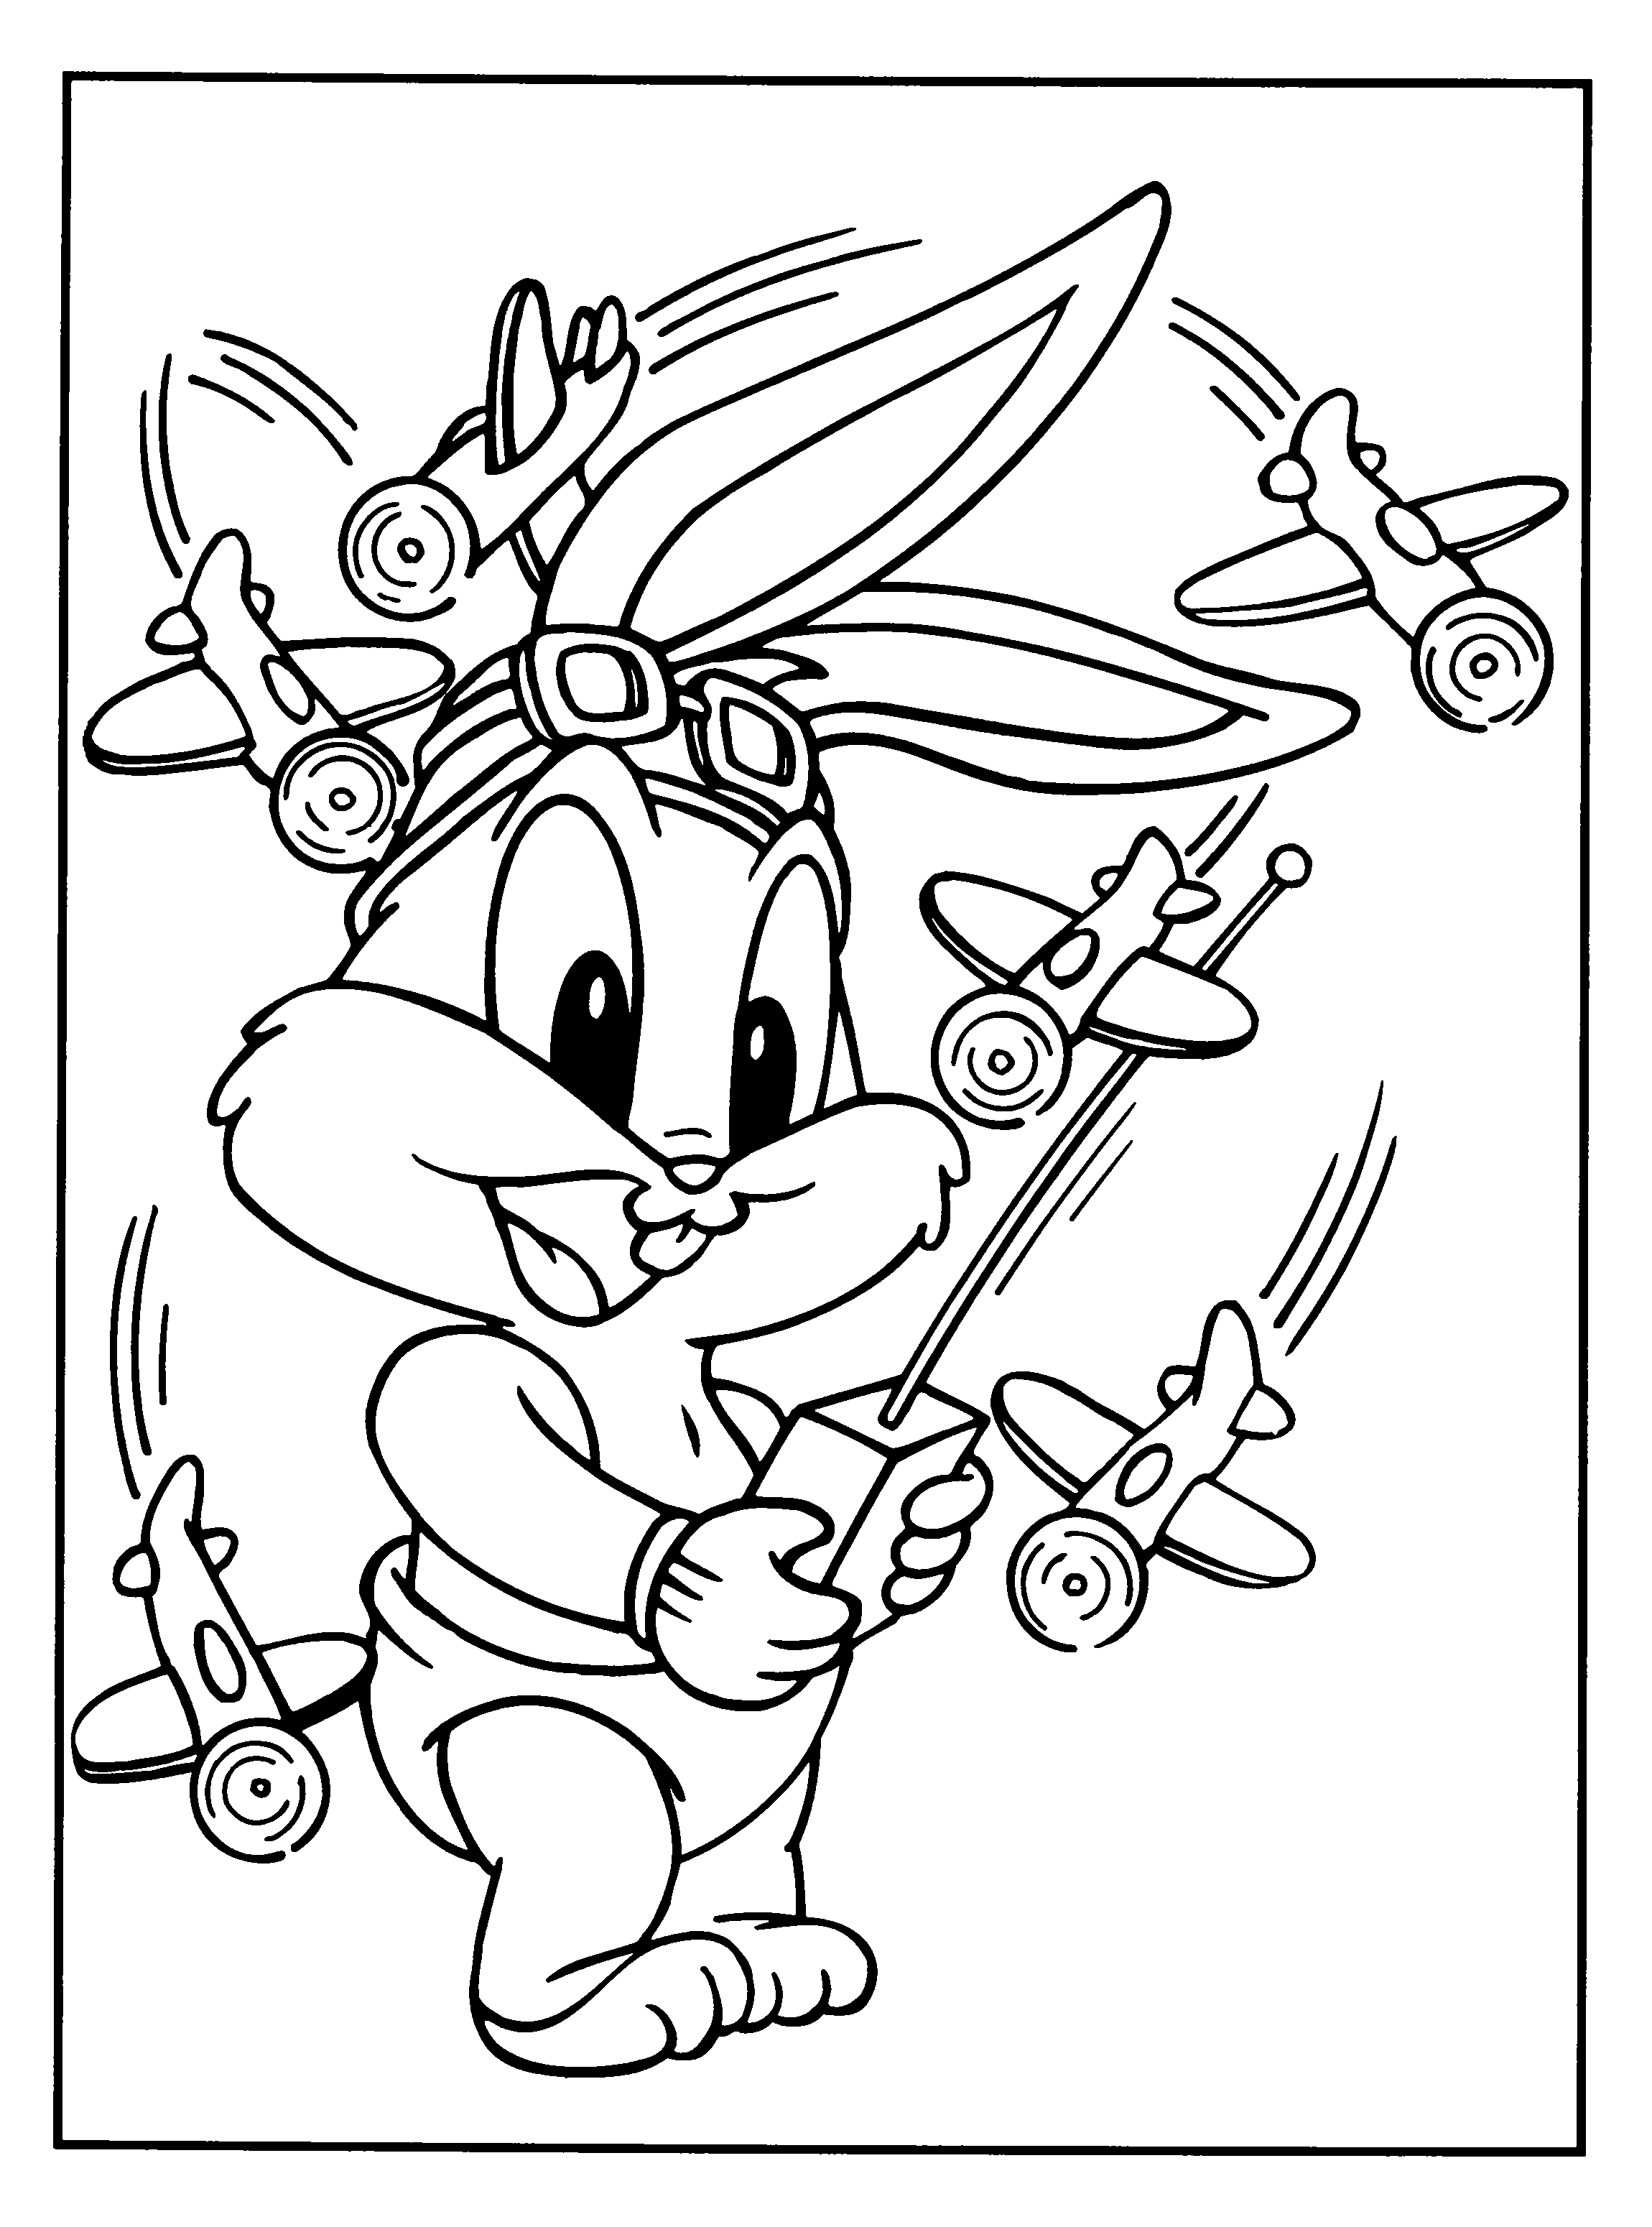 Coloring Pages Looney Tunes: Animated Images, Gifs, Pictures